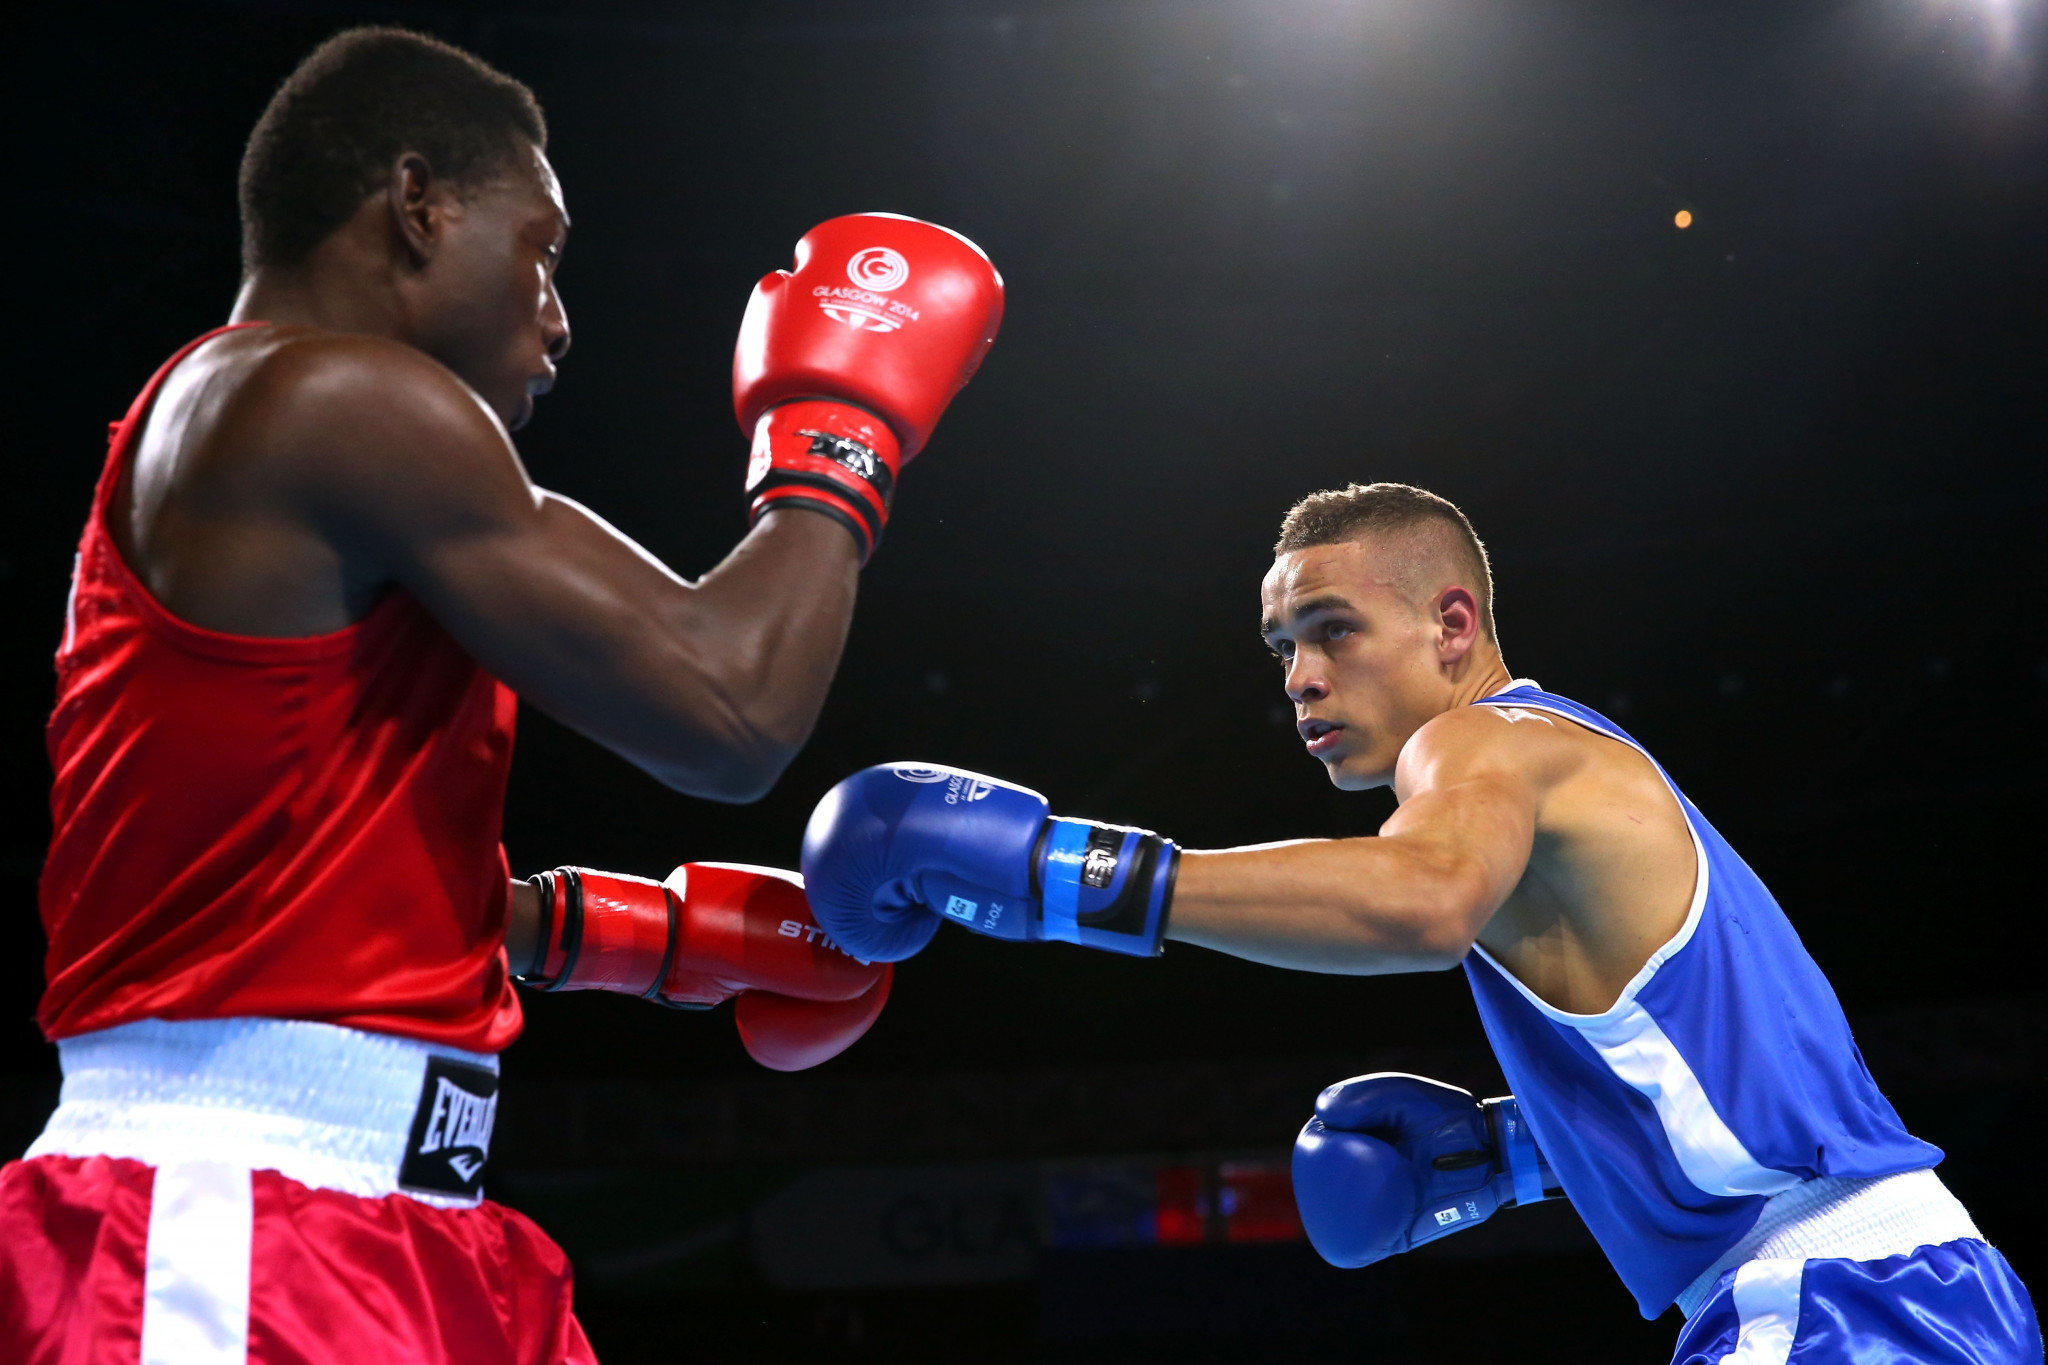 David Nyika won gold at Glasgow 2014 but missed out on competing at Rio 2016 ©Getty Images